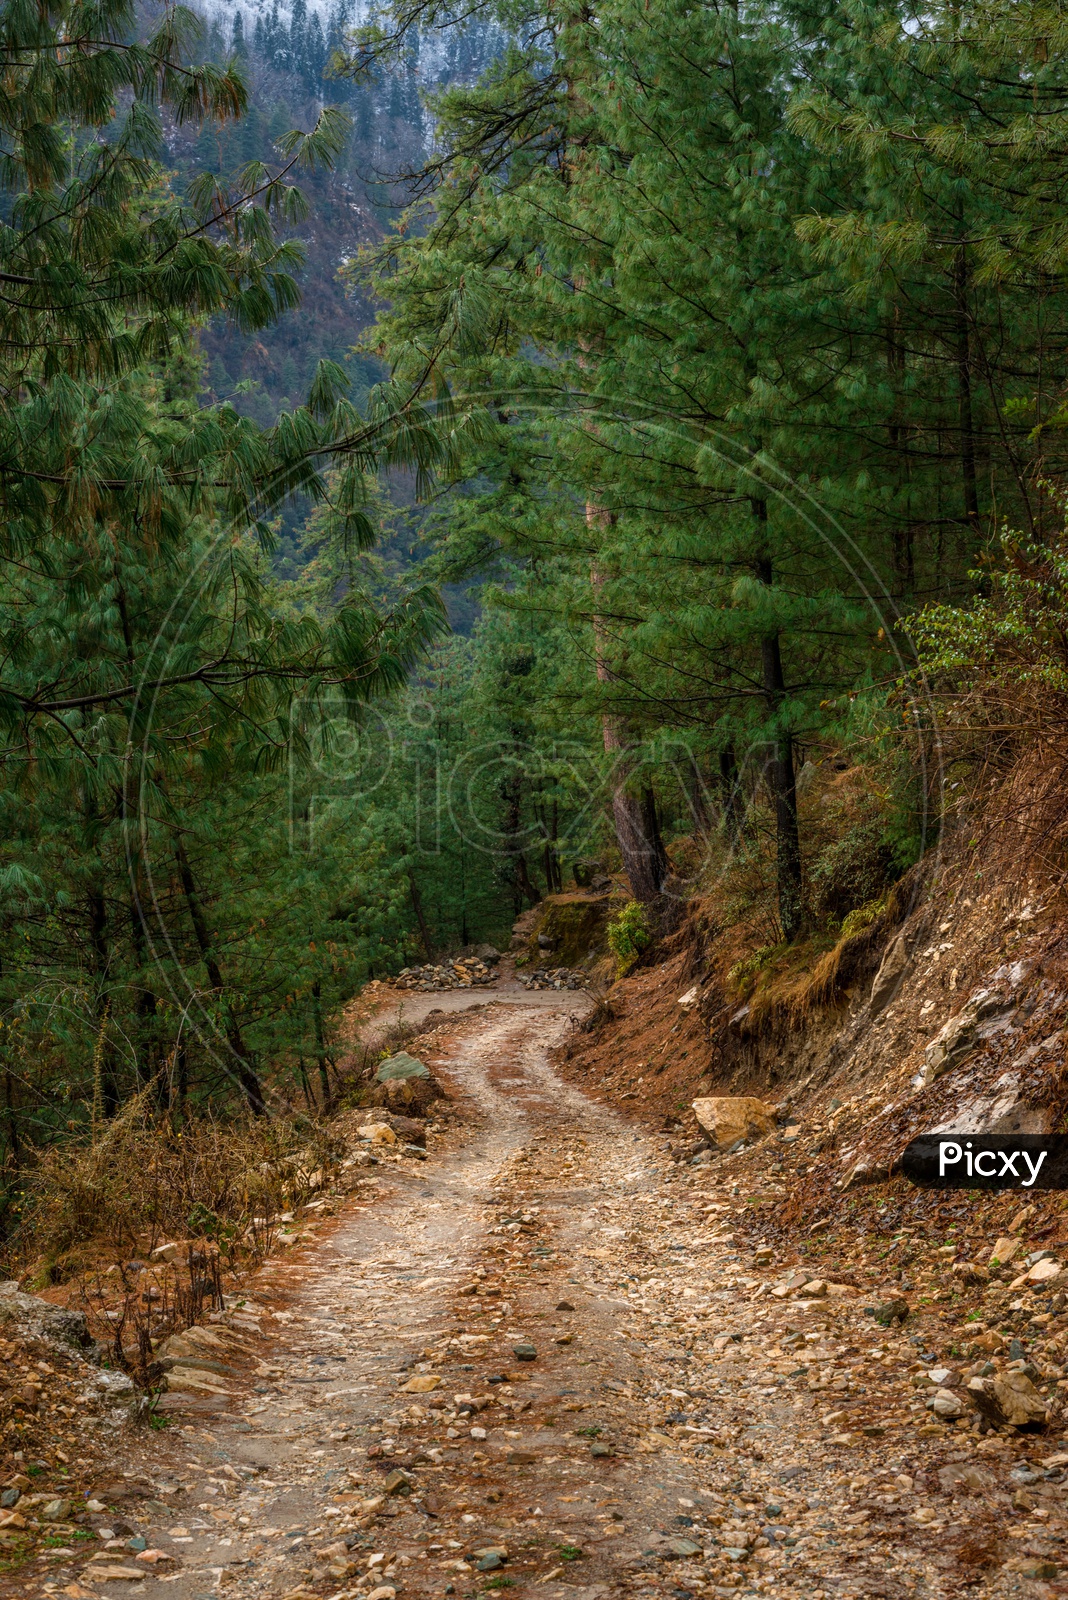 Narrow road in the Himalayas surrounded by deodar trees